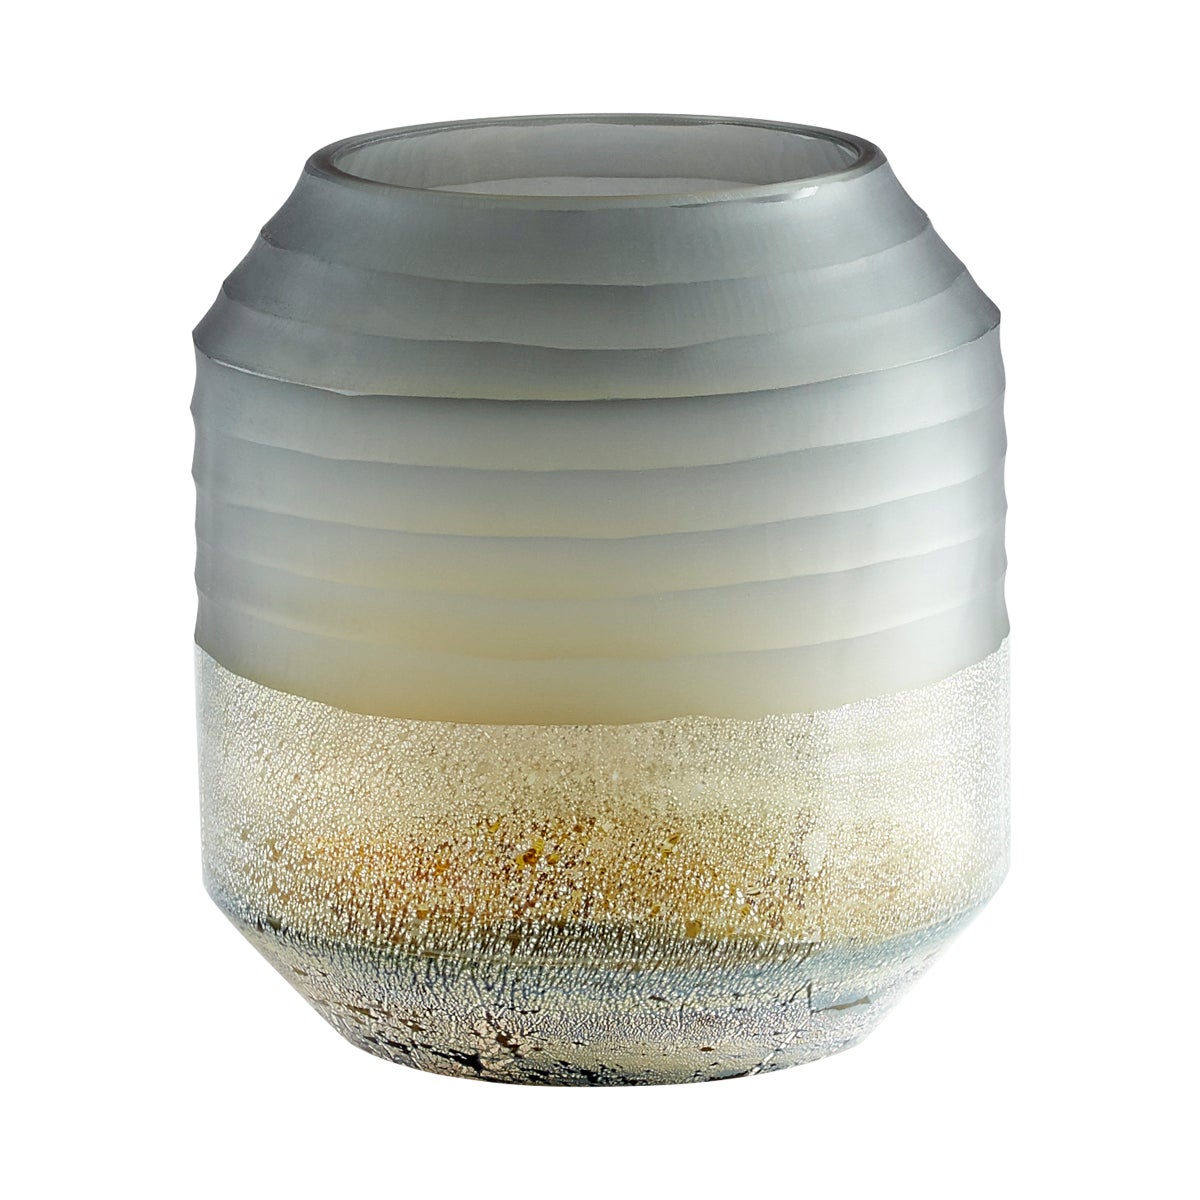 Alchemy Vase | Grey And Guilded Silver - Small